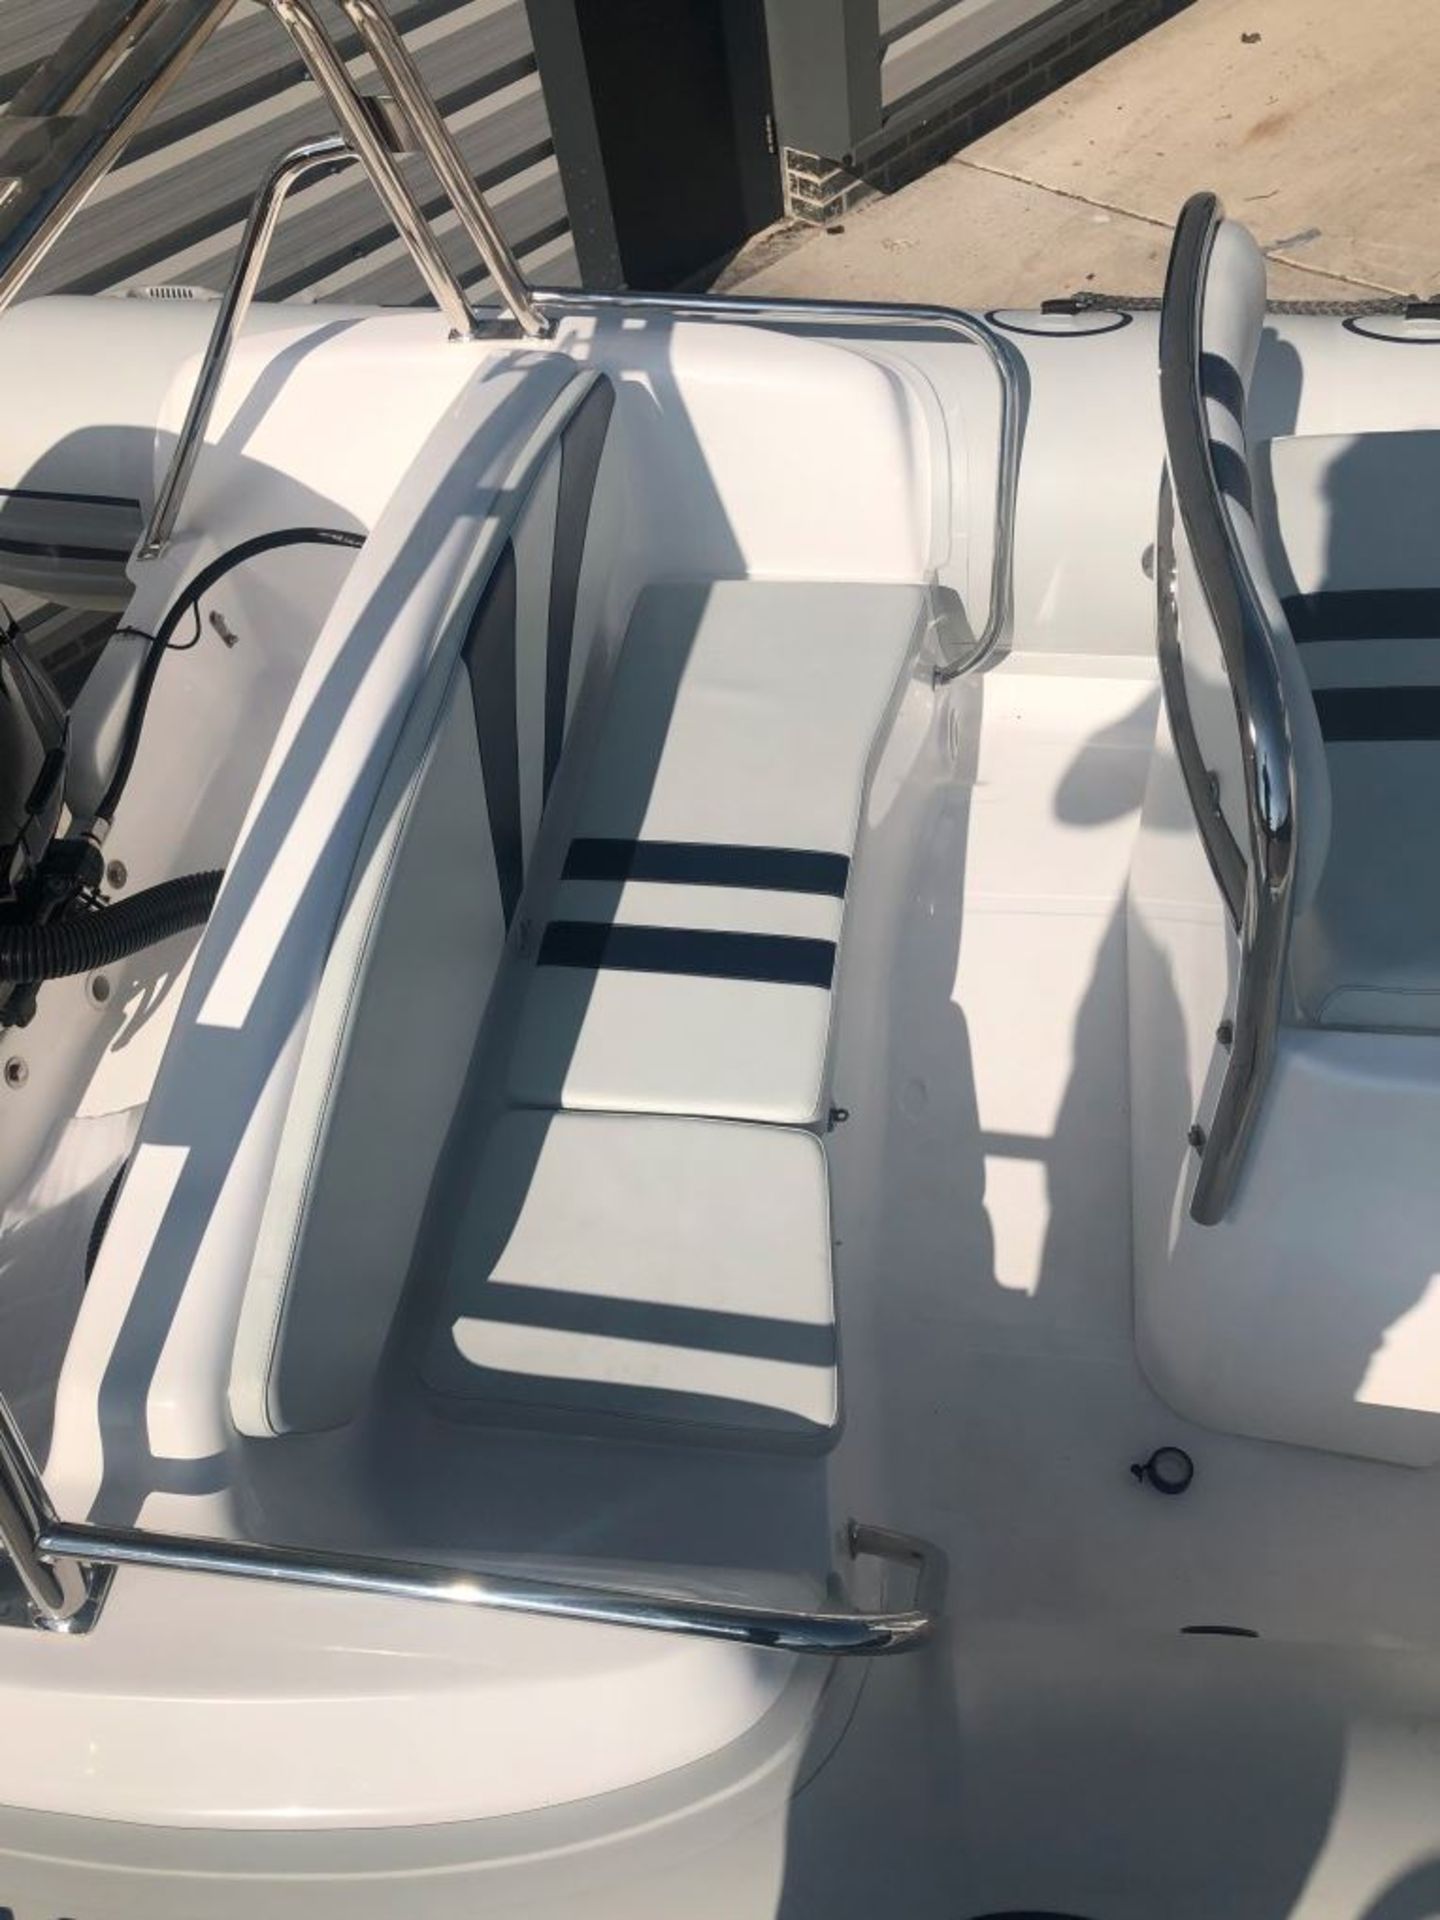 Infanta 5.8LRi Rib Complete With 115hp Mercury 4stroke and Trailer - Image 10 of 17